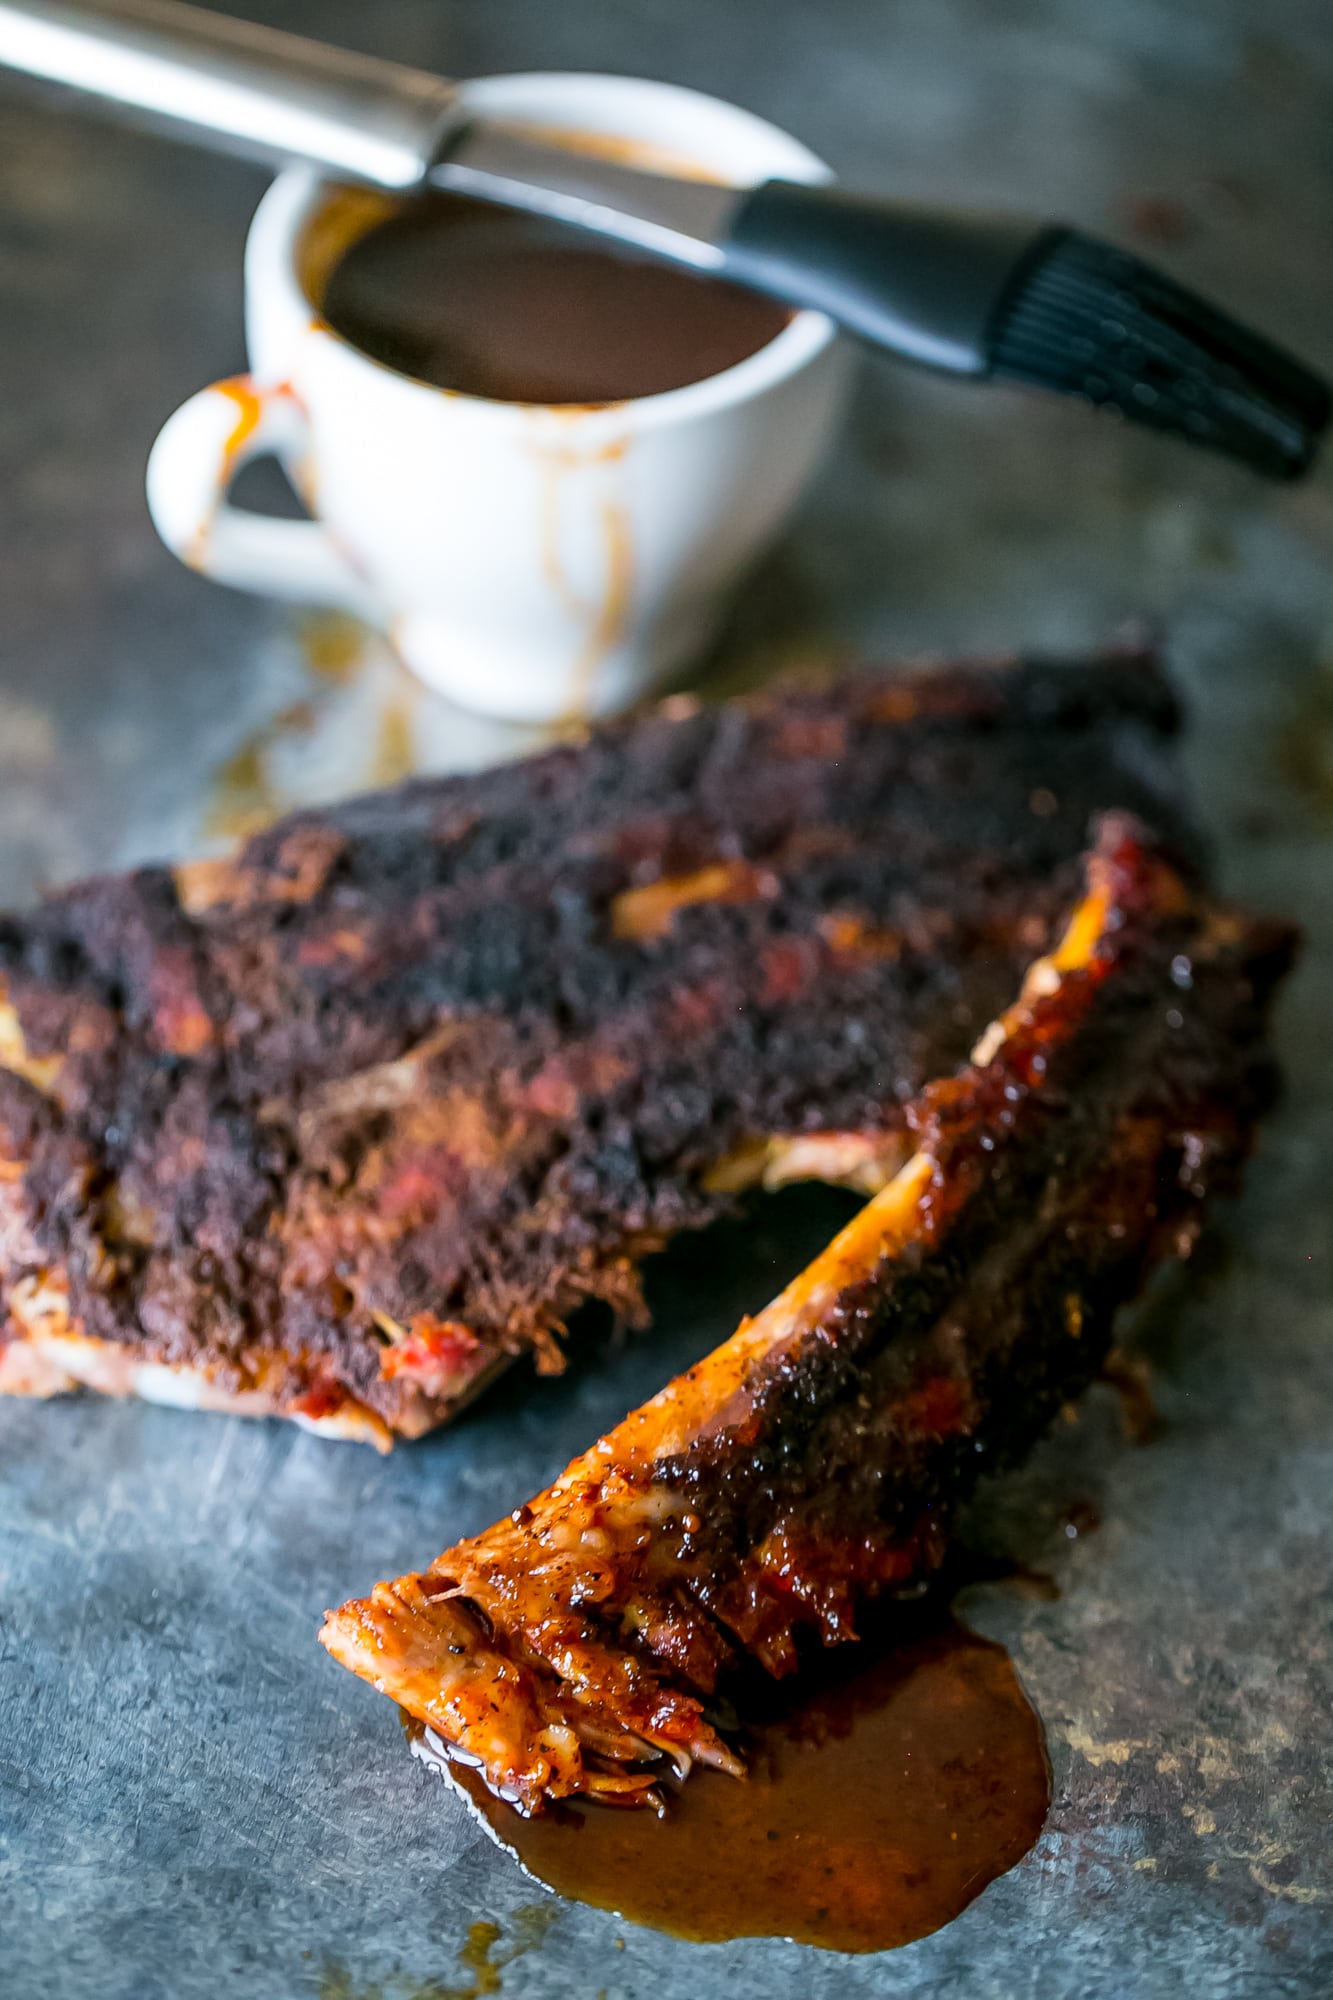 These smoked ribs are fall off the bone good - I love this method for perfect smoked ribs! 